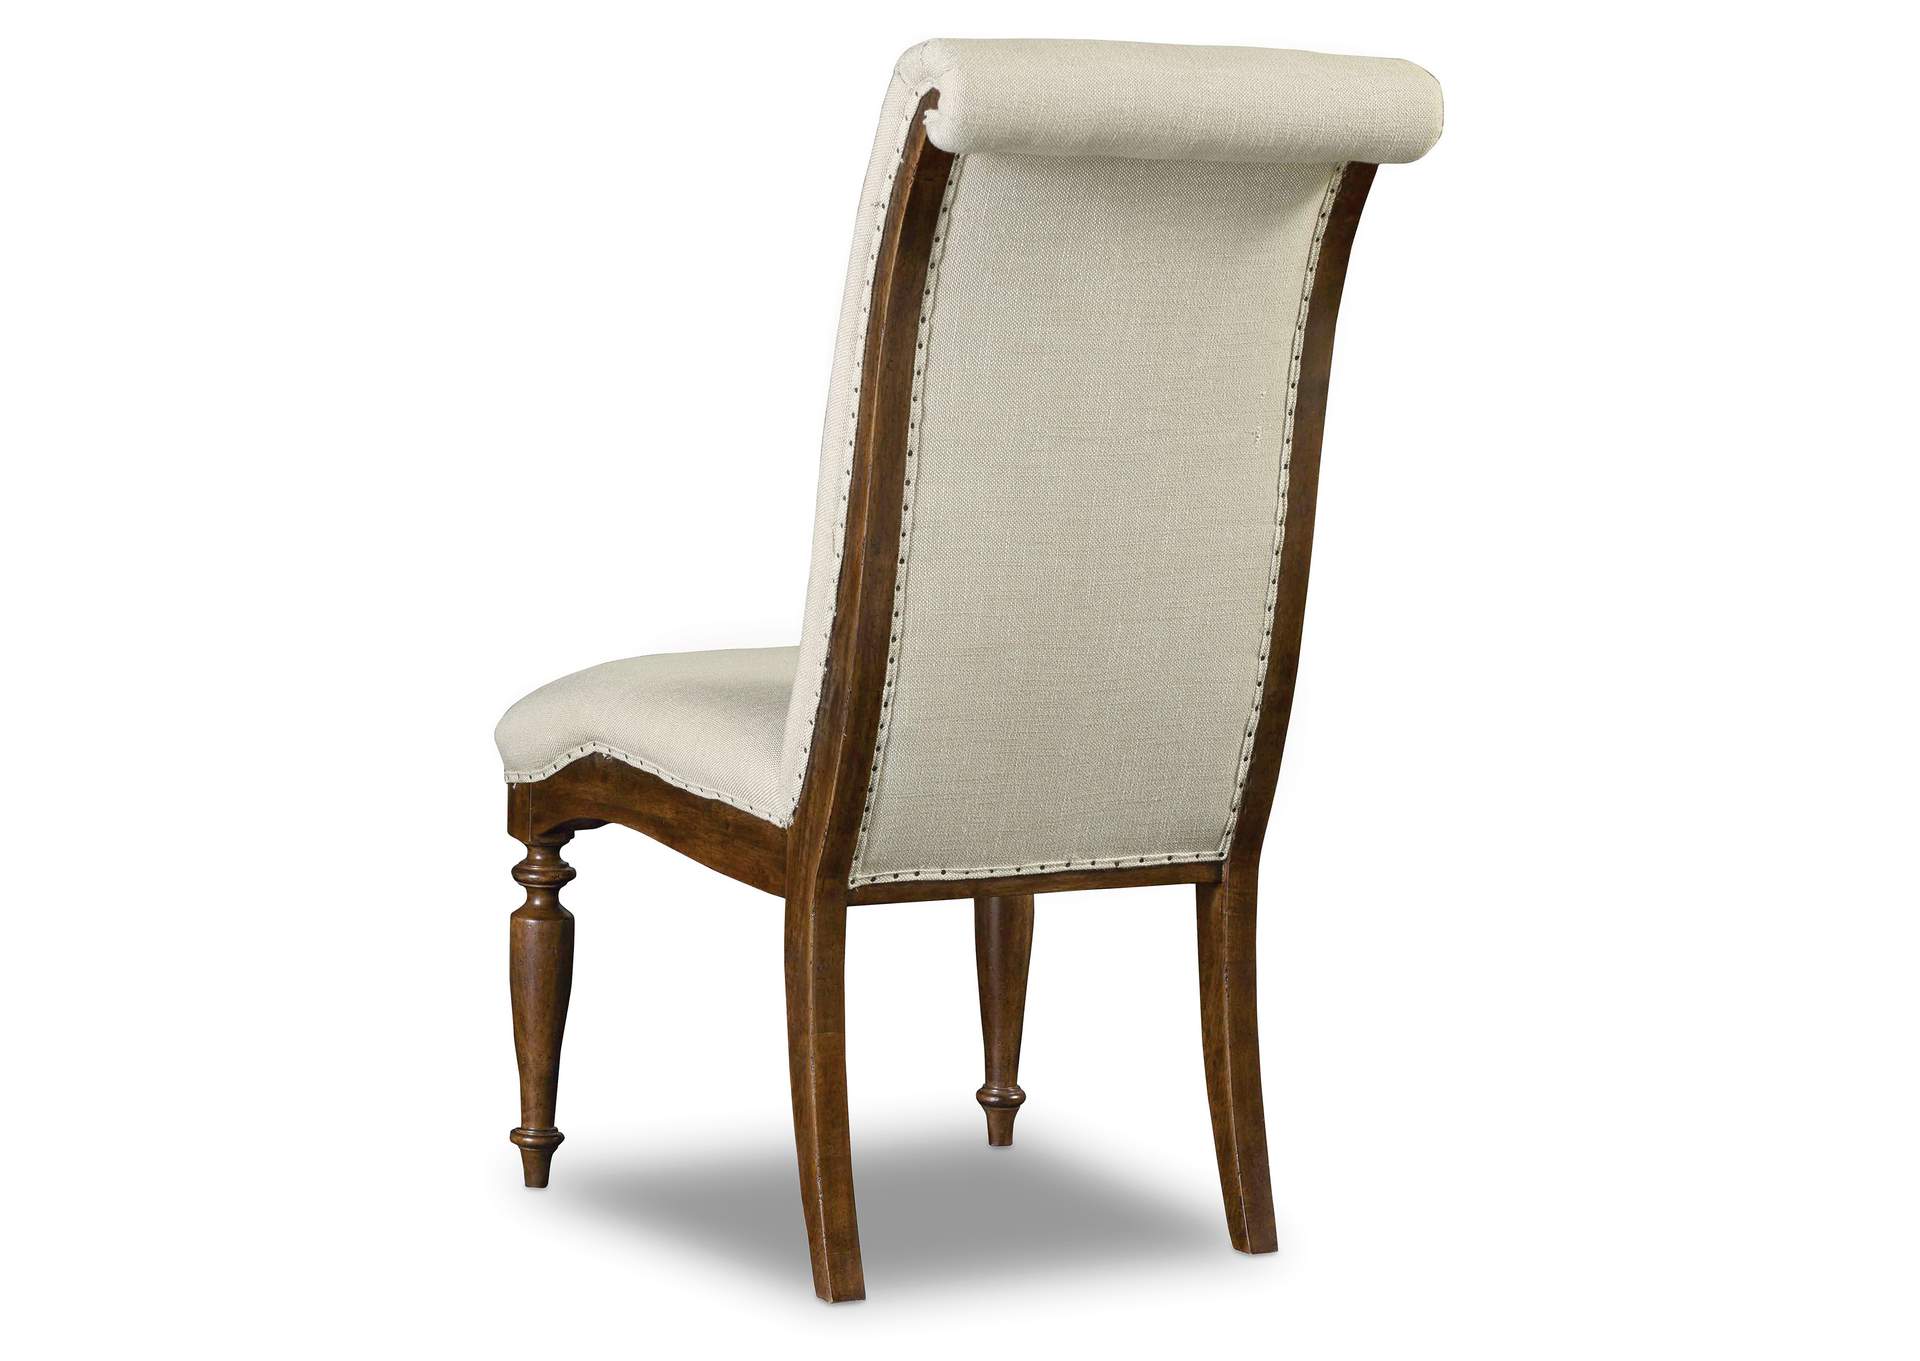 Archivist Upholstered Side Chair - 2 Per Carton - Price Ea,Hooker Furniture